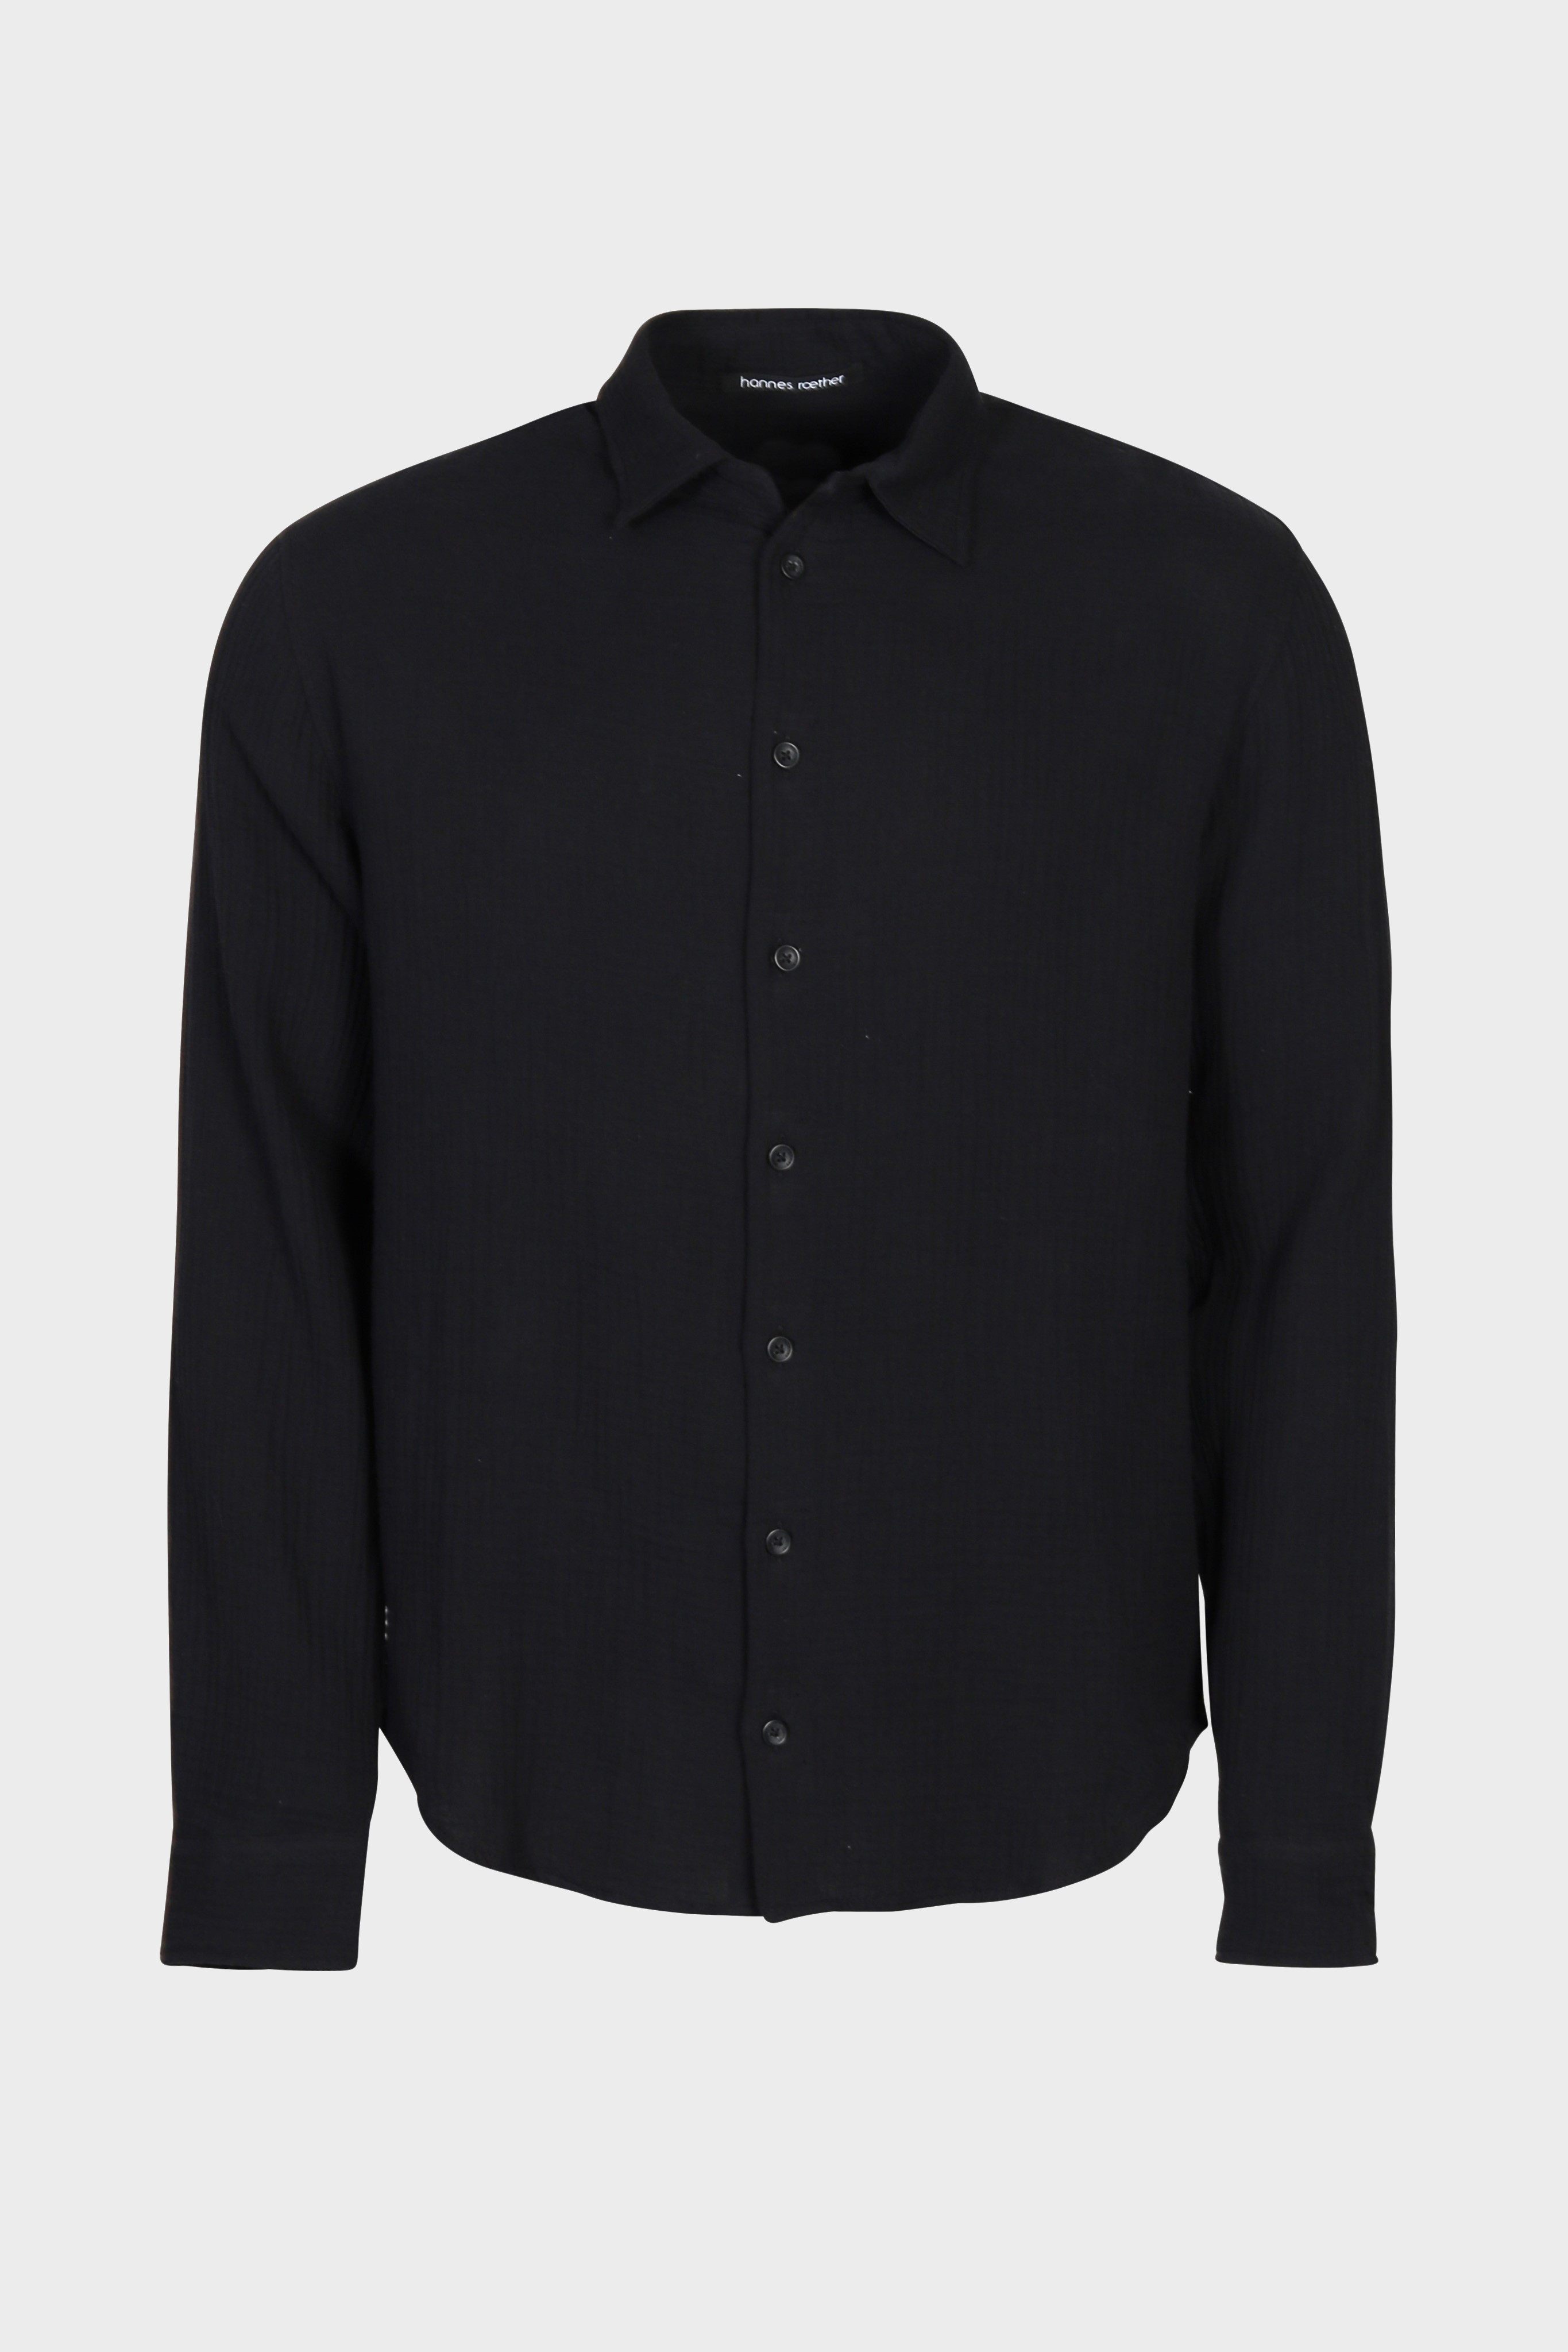 HANNES ROETHER Mousseline Shirt in Black L